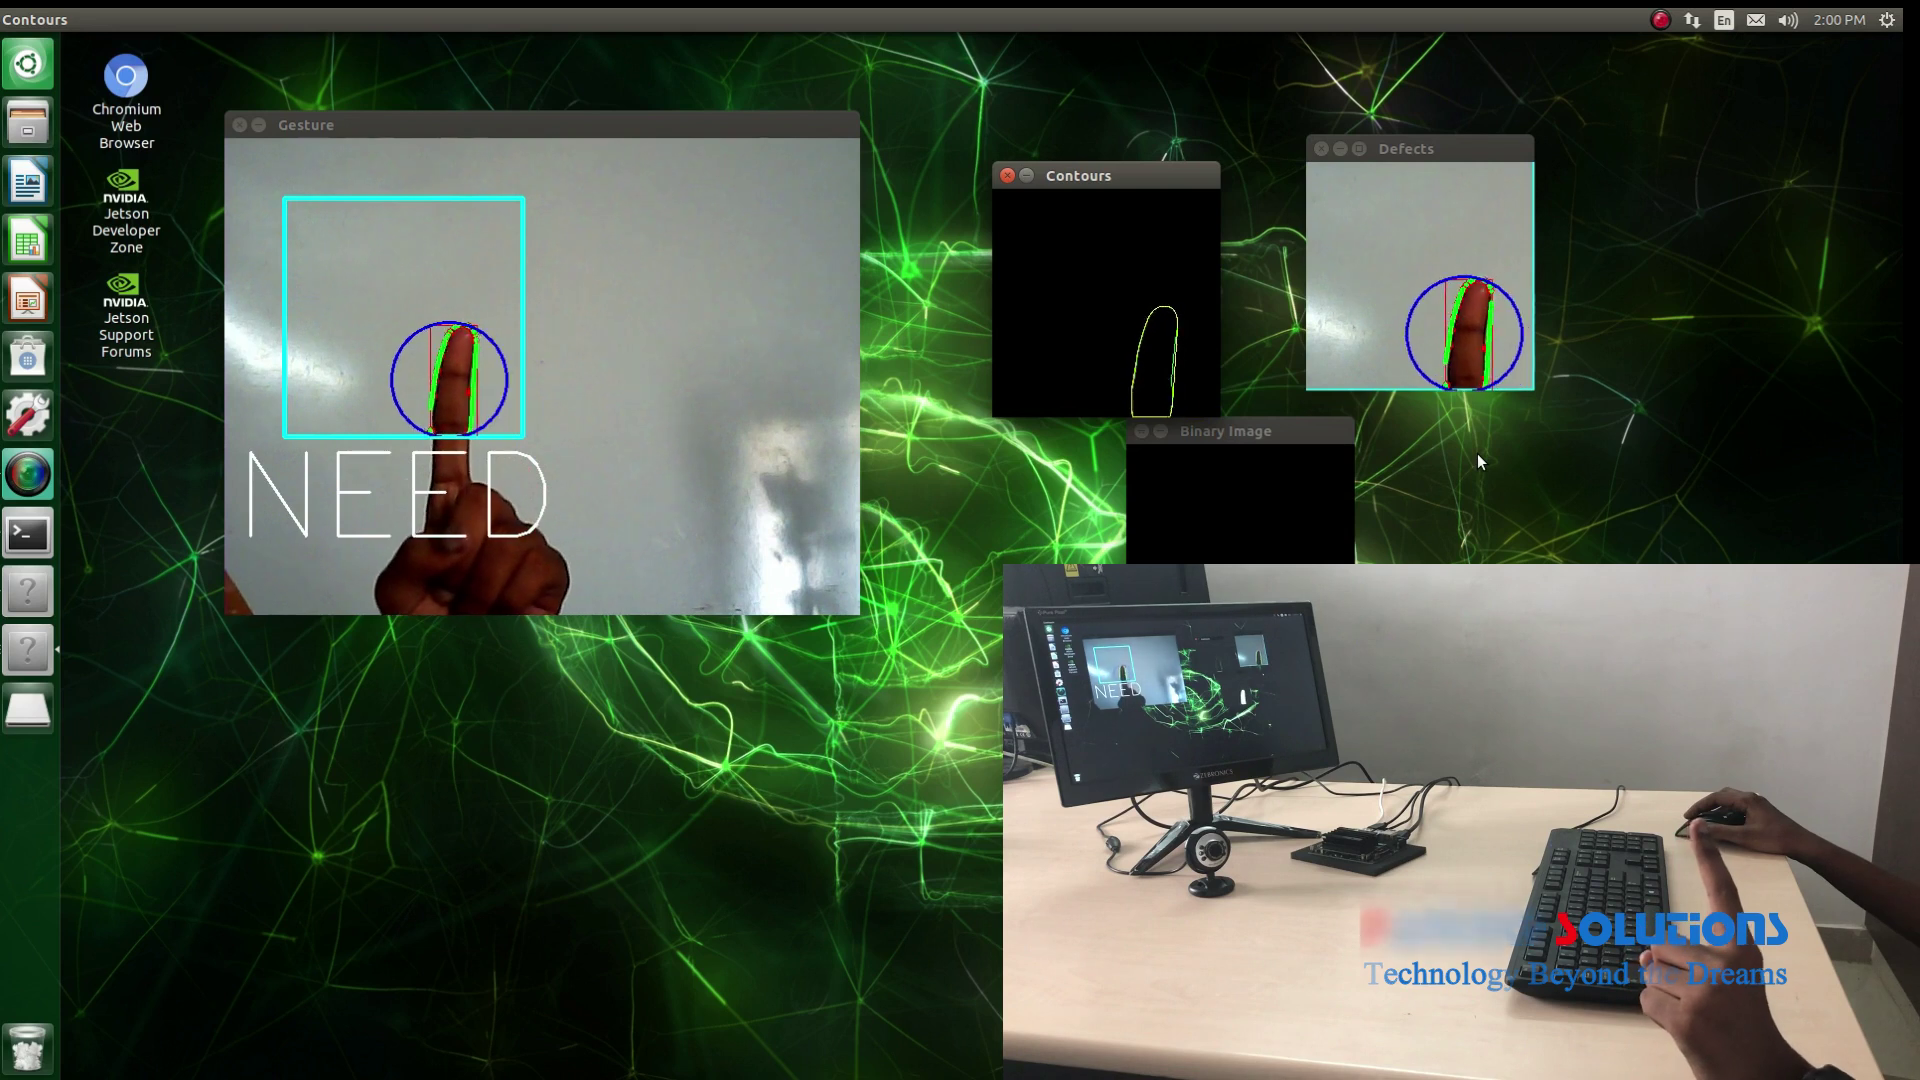 Gesture recognition using Jetson Nano - Need